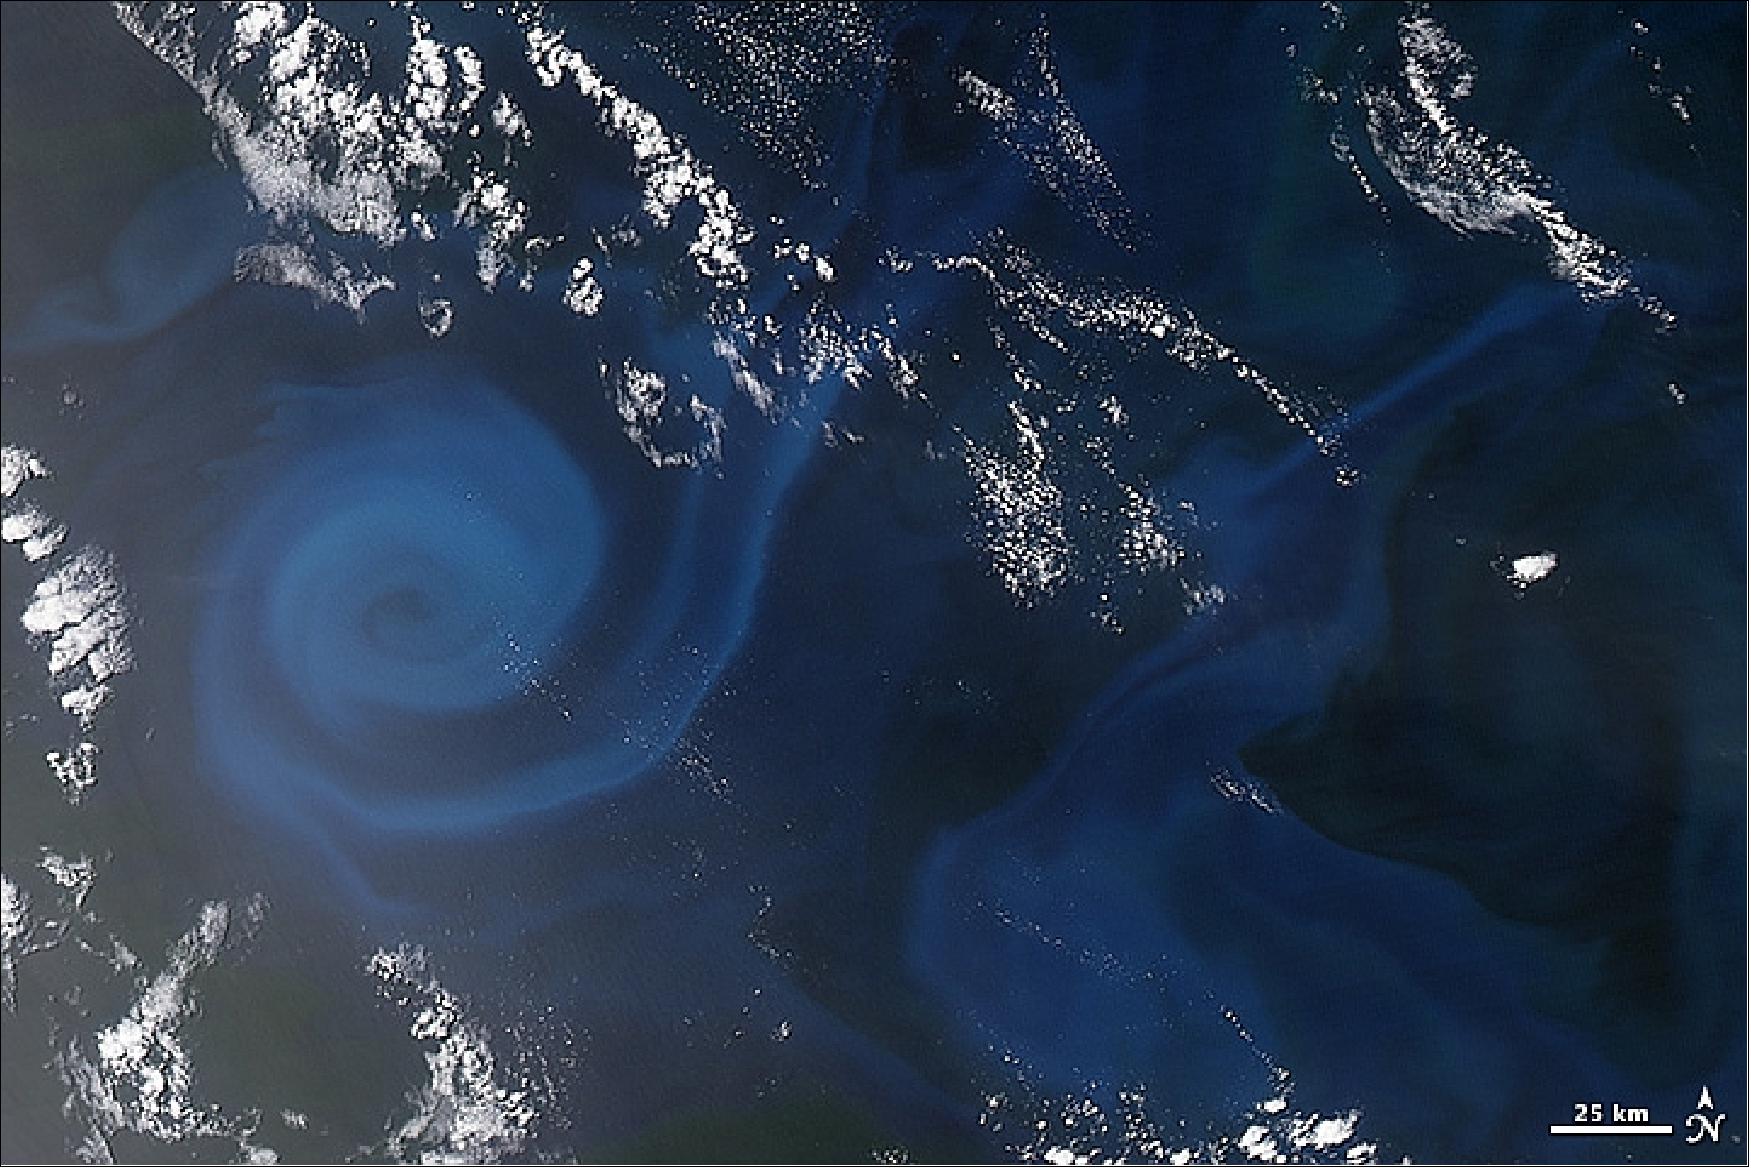 Figure 132: The Aqua satellite acquired this natural-color satellite image of a plankton bloom on Dec. 30, 2013. The eddy is centered about 600 km off the coast of Australia in the southeastern Indian Ocean (image credit: NASA Earth Observatory) 96)